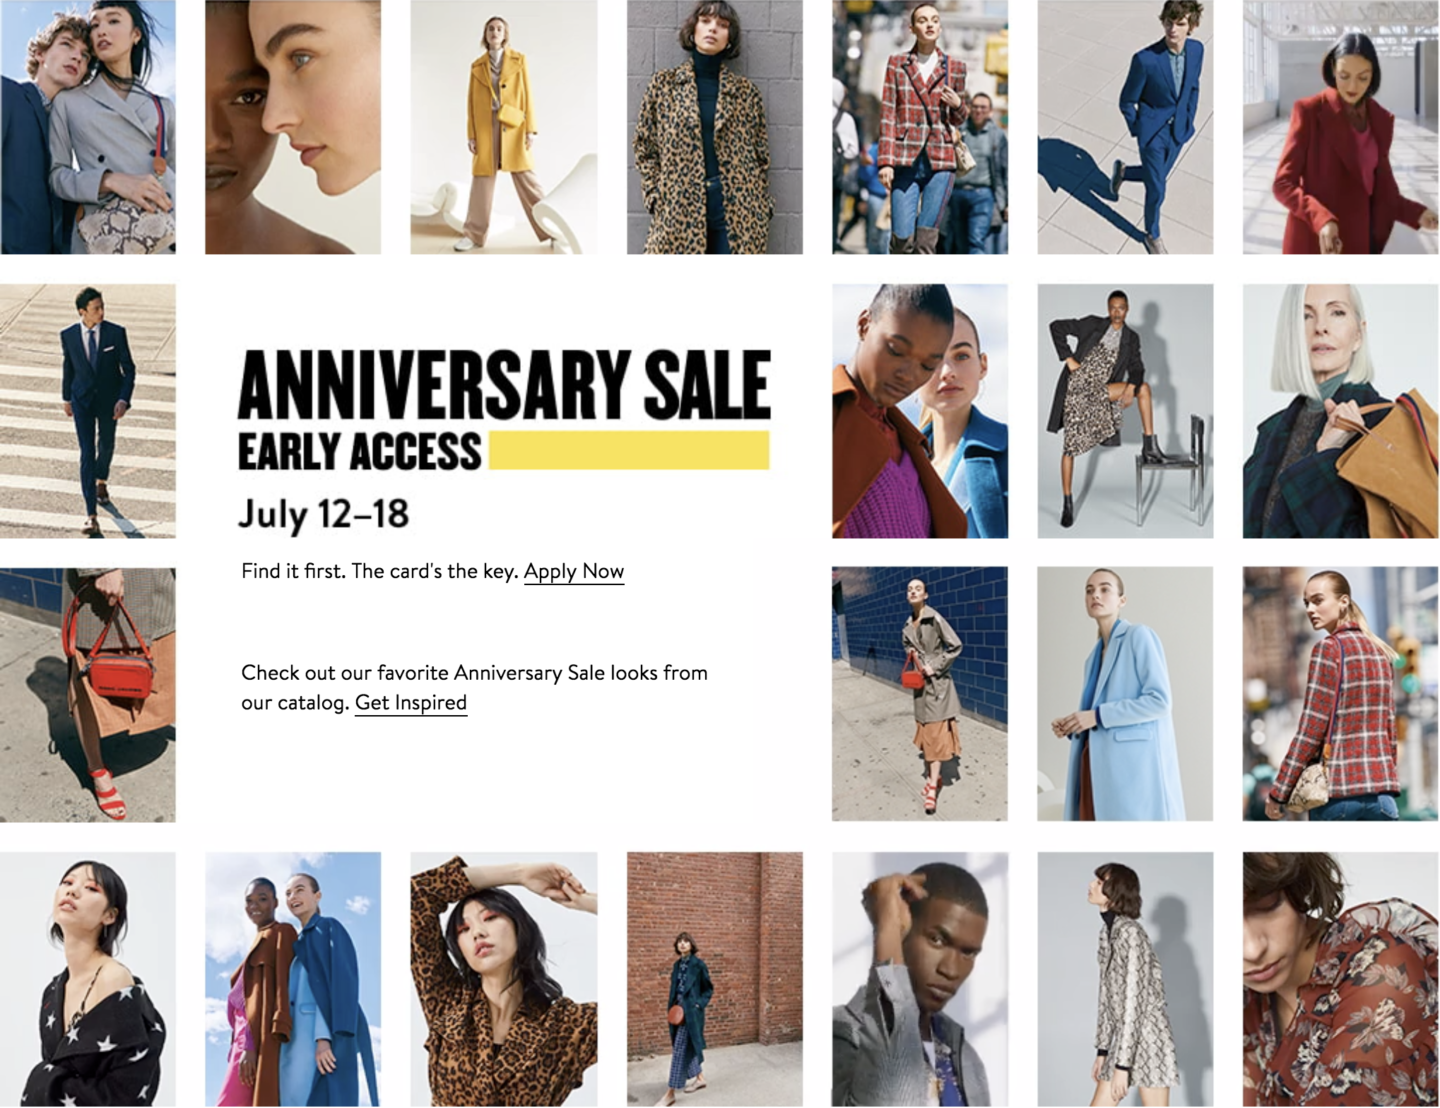 Nordstrom Anniversary Sale 2019 Tips & Picks Lil bits of Chic